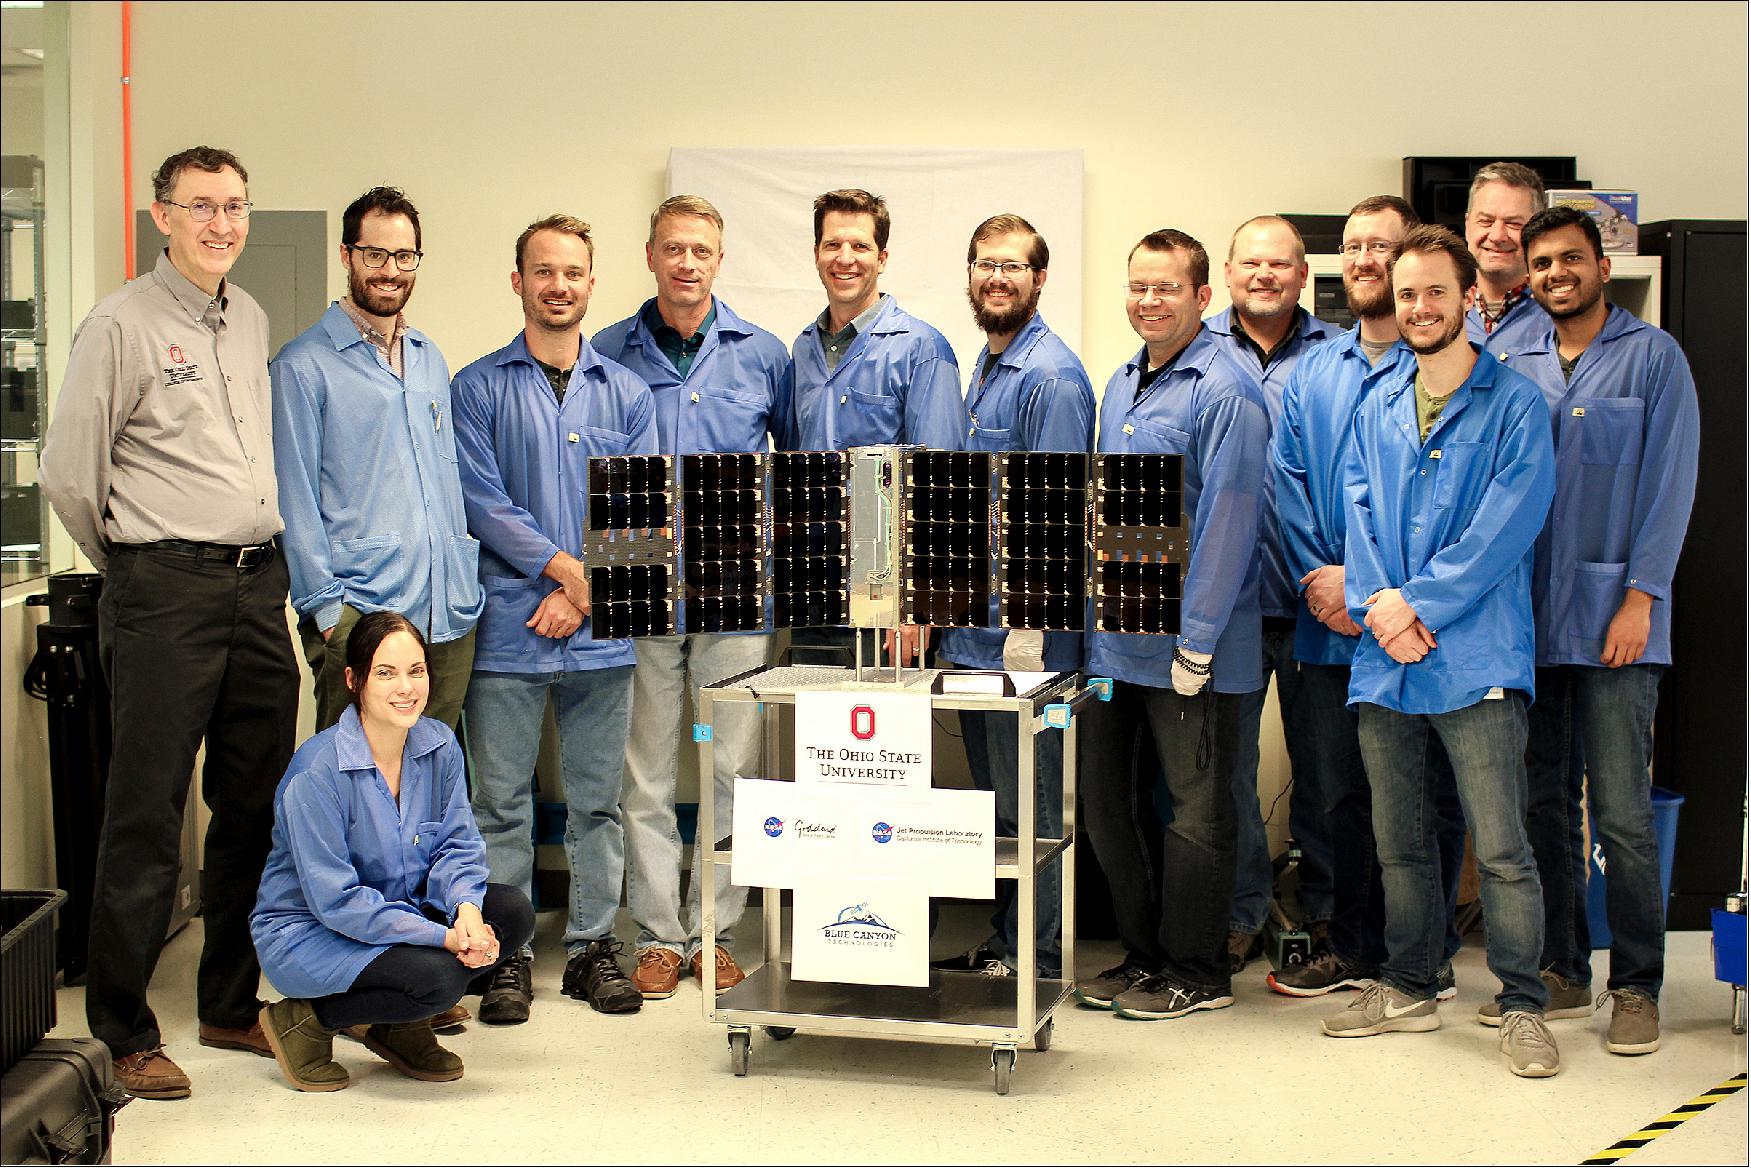 Figure 4: The CubeRRT satellite and Blue Canyon Technologies team members with Principal Investigator Joel Johnson (far left) of The Ohio State University (image credit: Blue Canyon Technologies) 7)